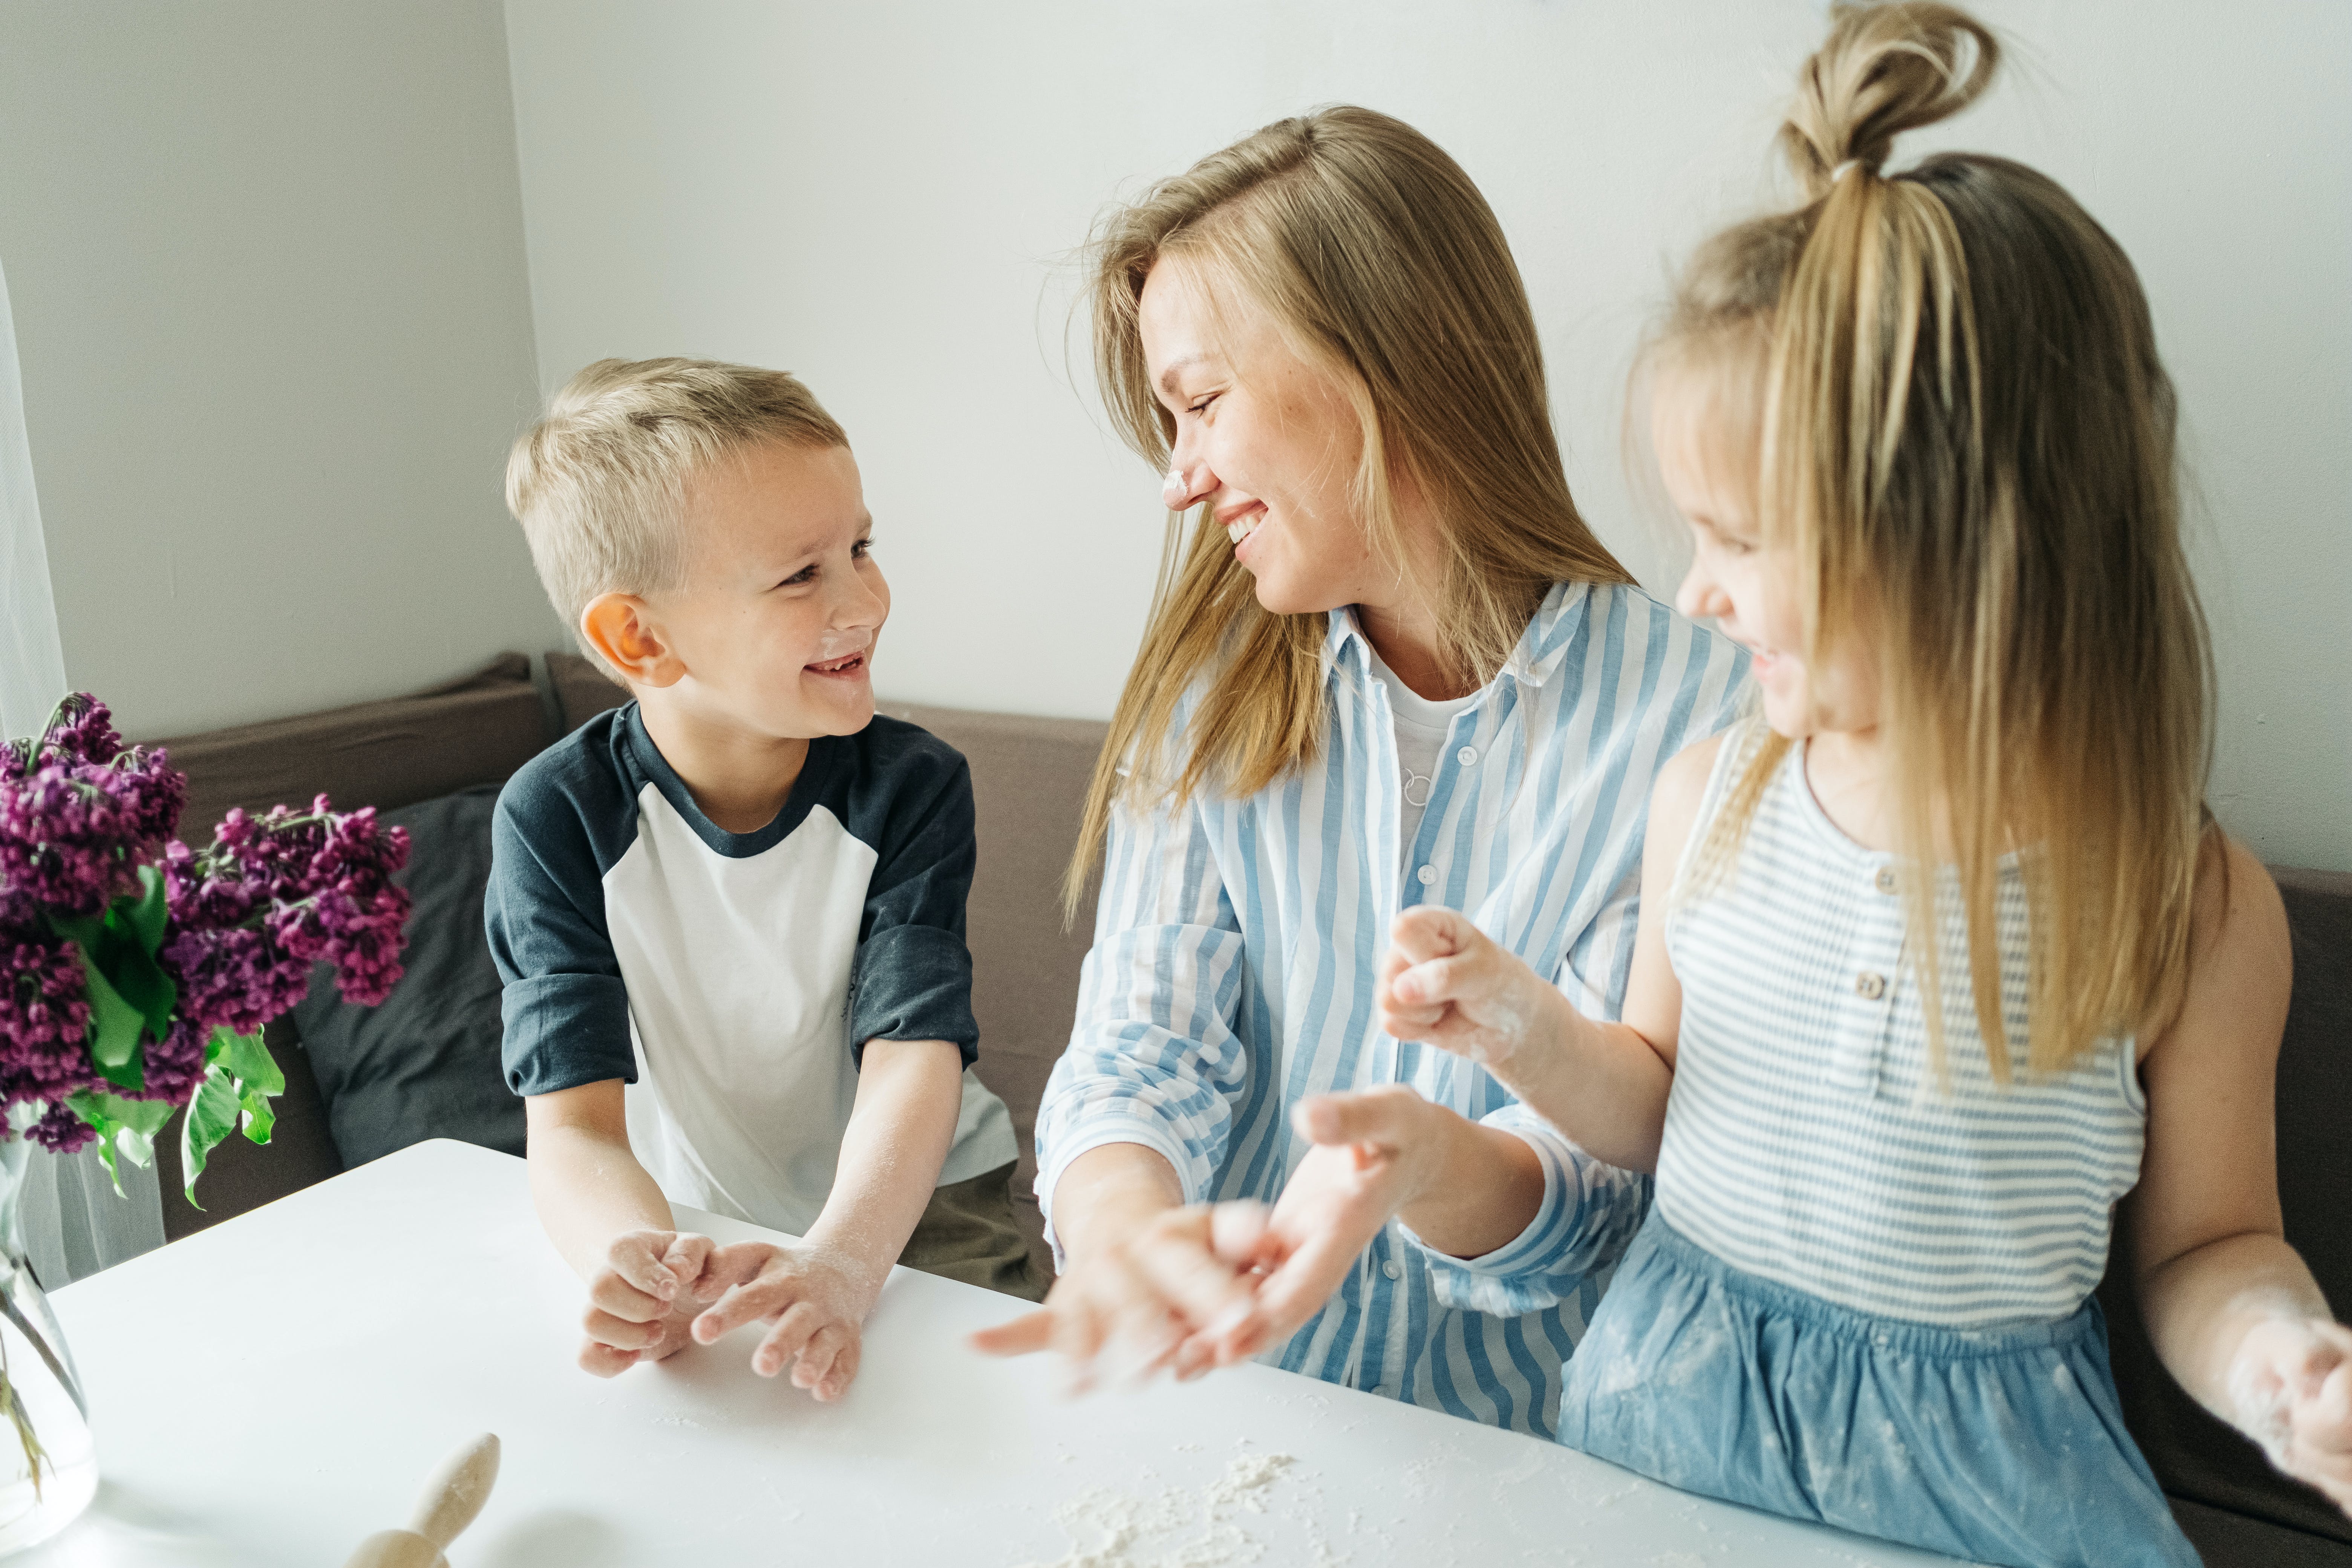 A woman bonding with other son and daughter | Source: Pexels